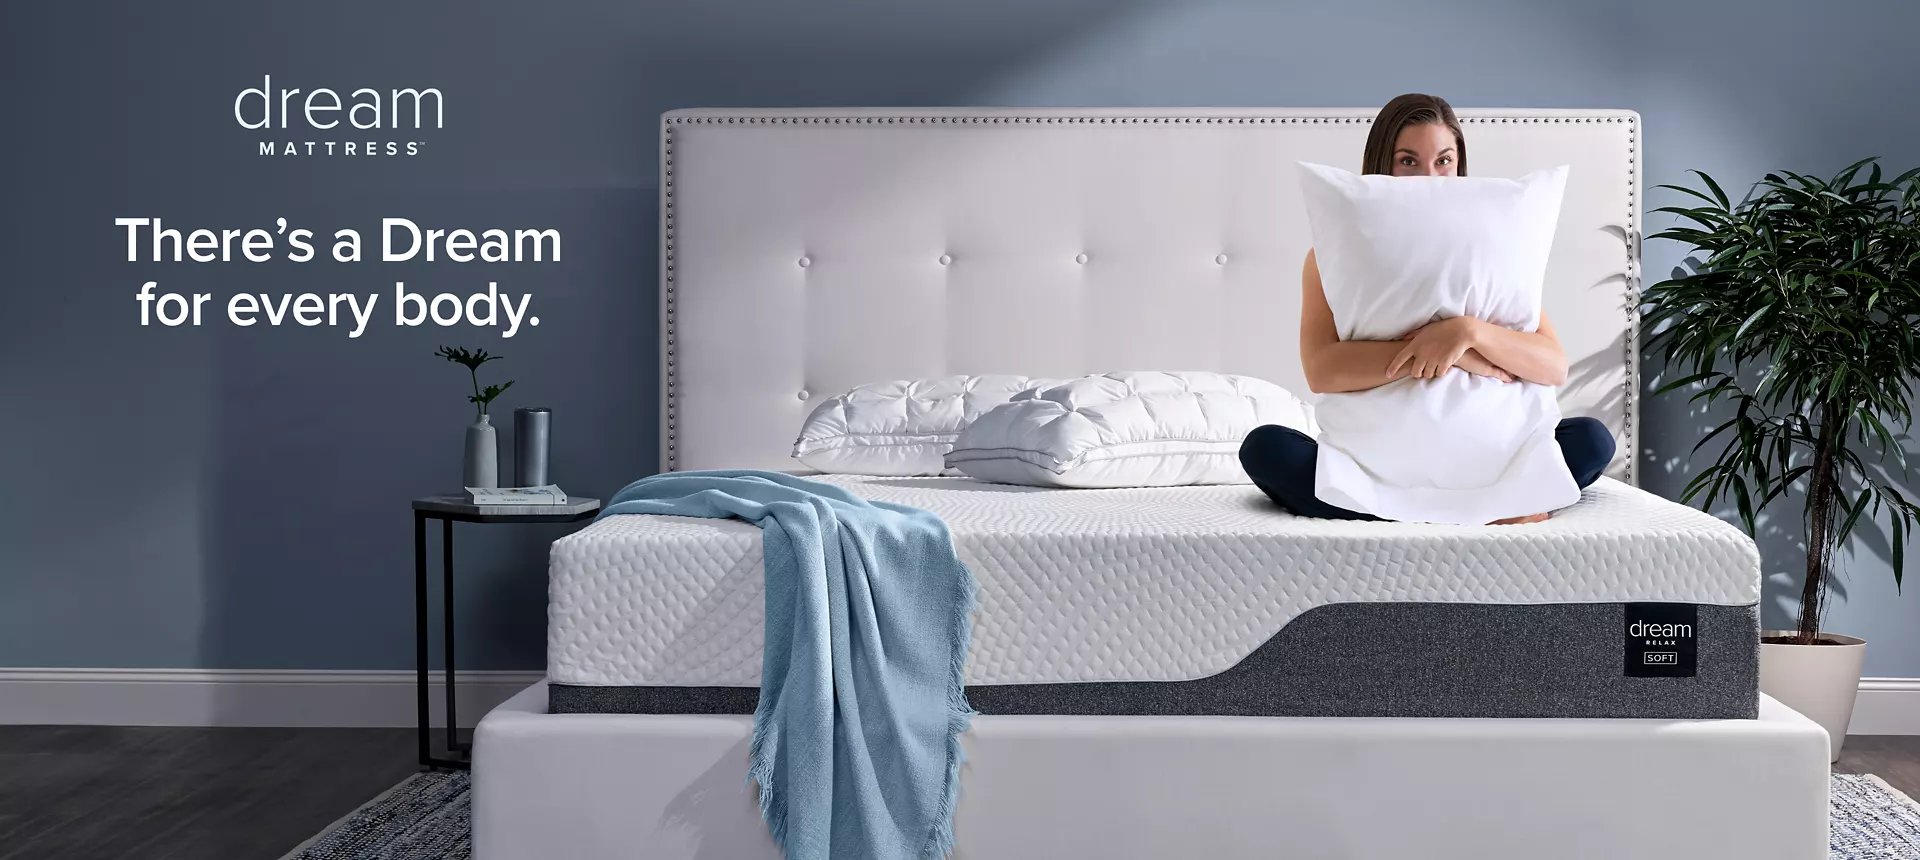 Dream Mattresses - There's a Dream for Every Body - Shop Now